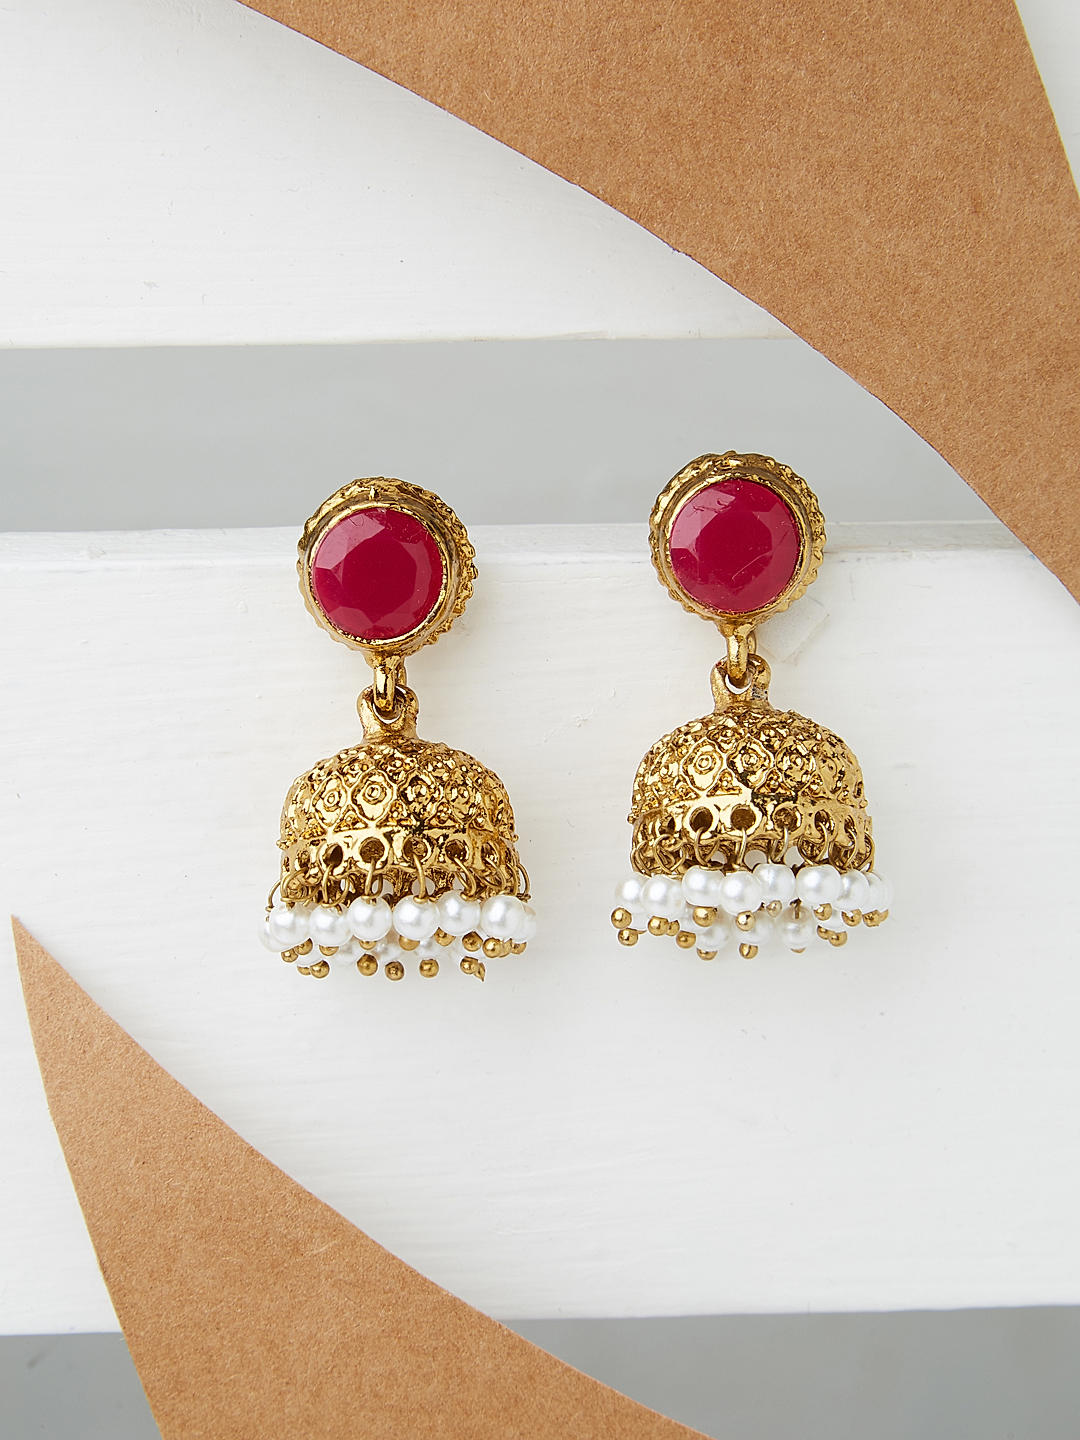 Antique Gold Dangler Earrings studded with Ruby